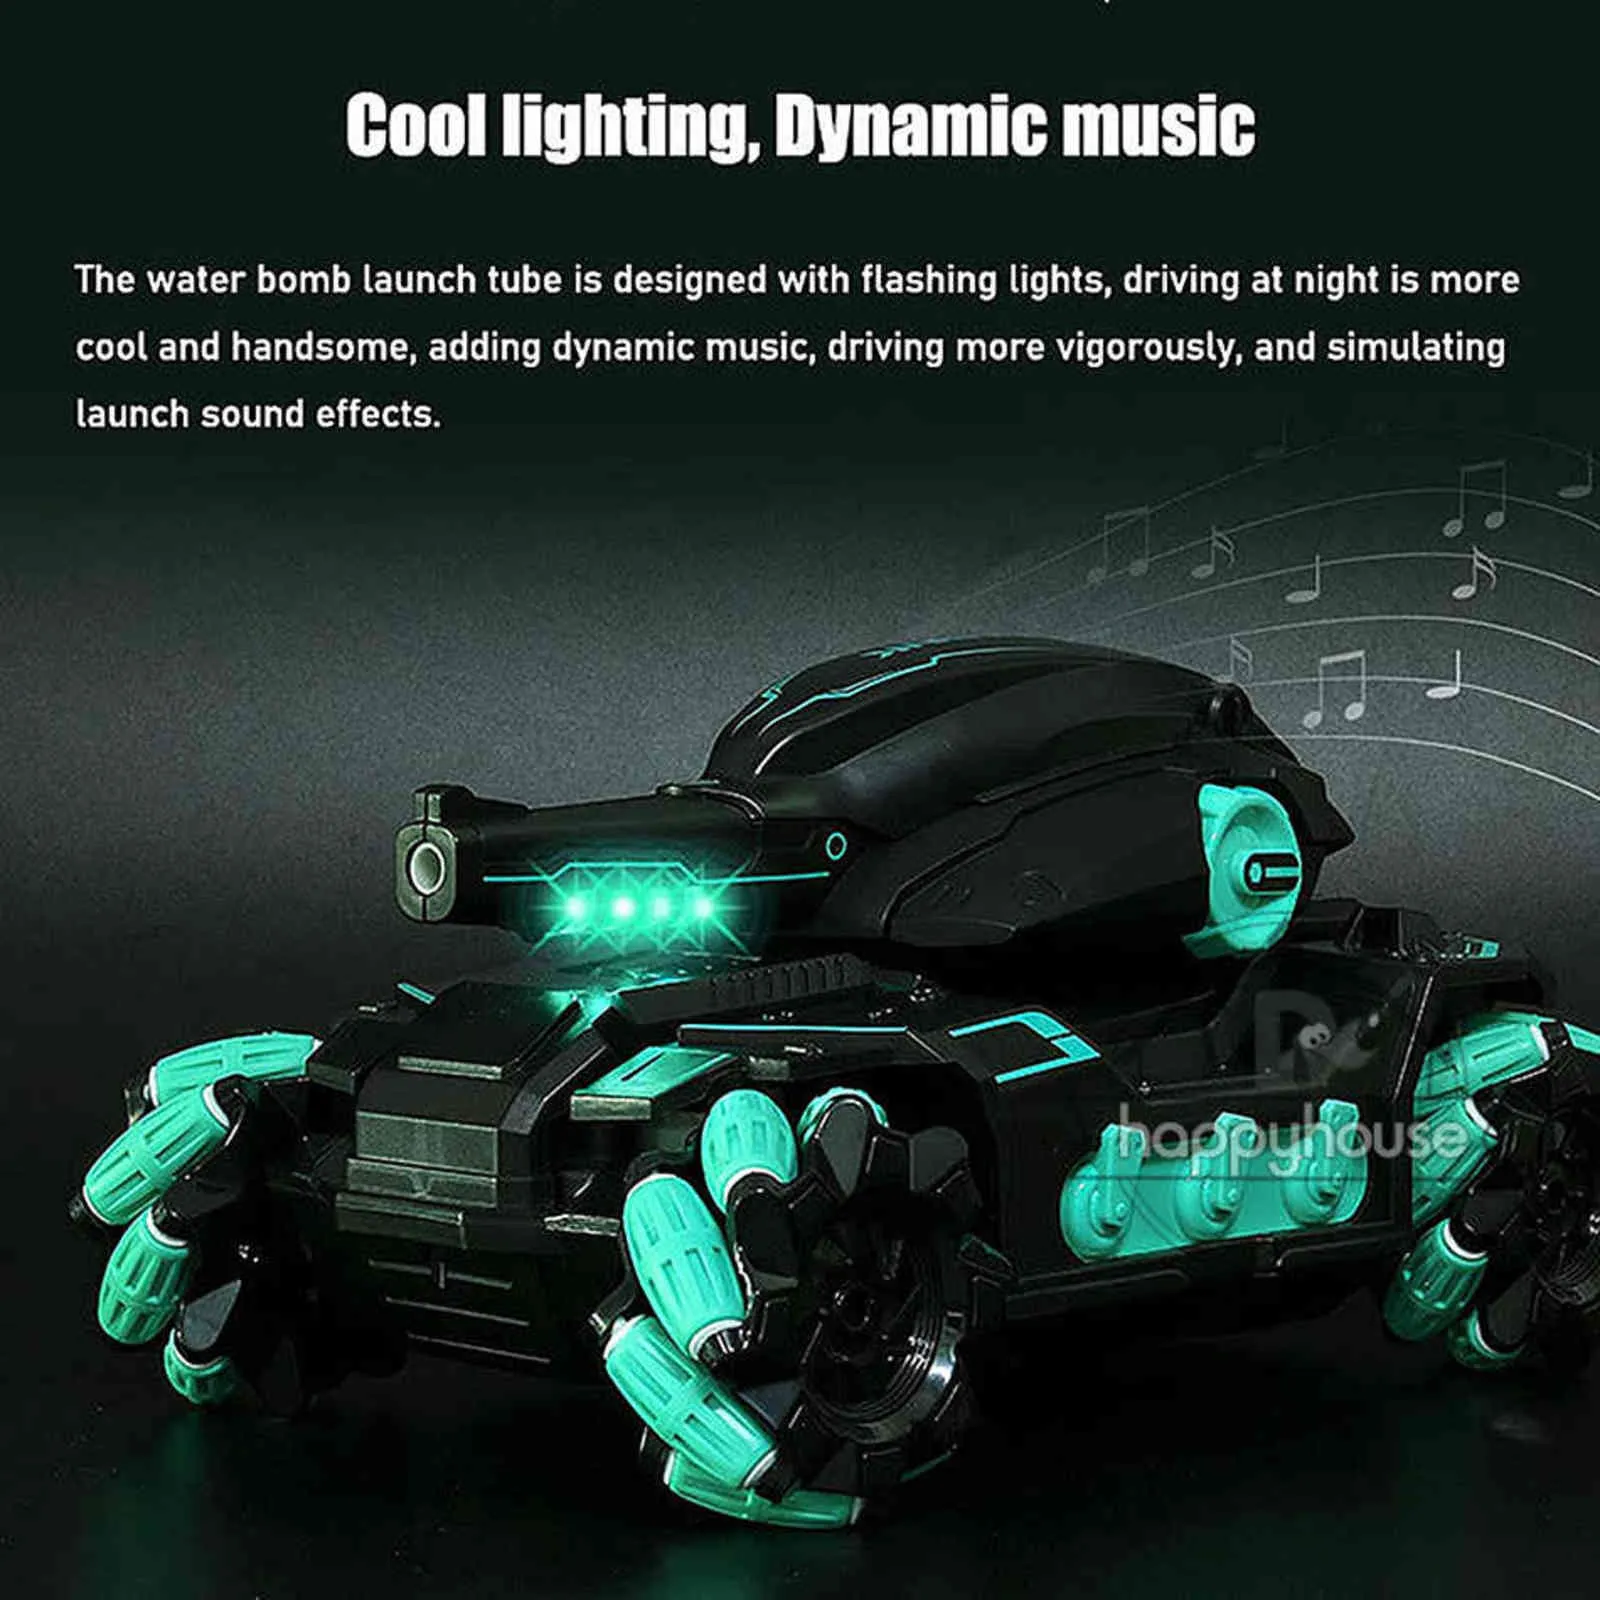 Remote Control Tank for Children Water Bomb Tank Toy Electric Gesture Remote Control Car RC Tank multiplayer RC Car for Boy Kids 29201182